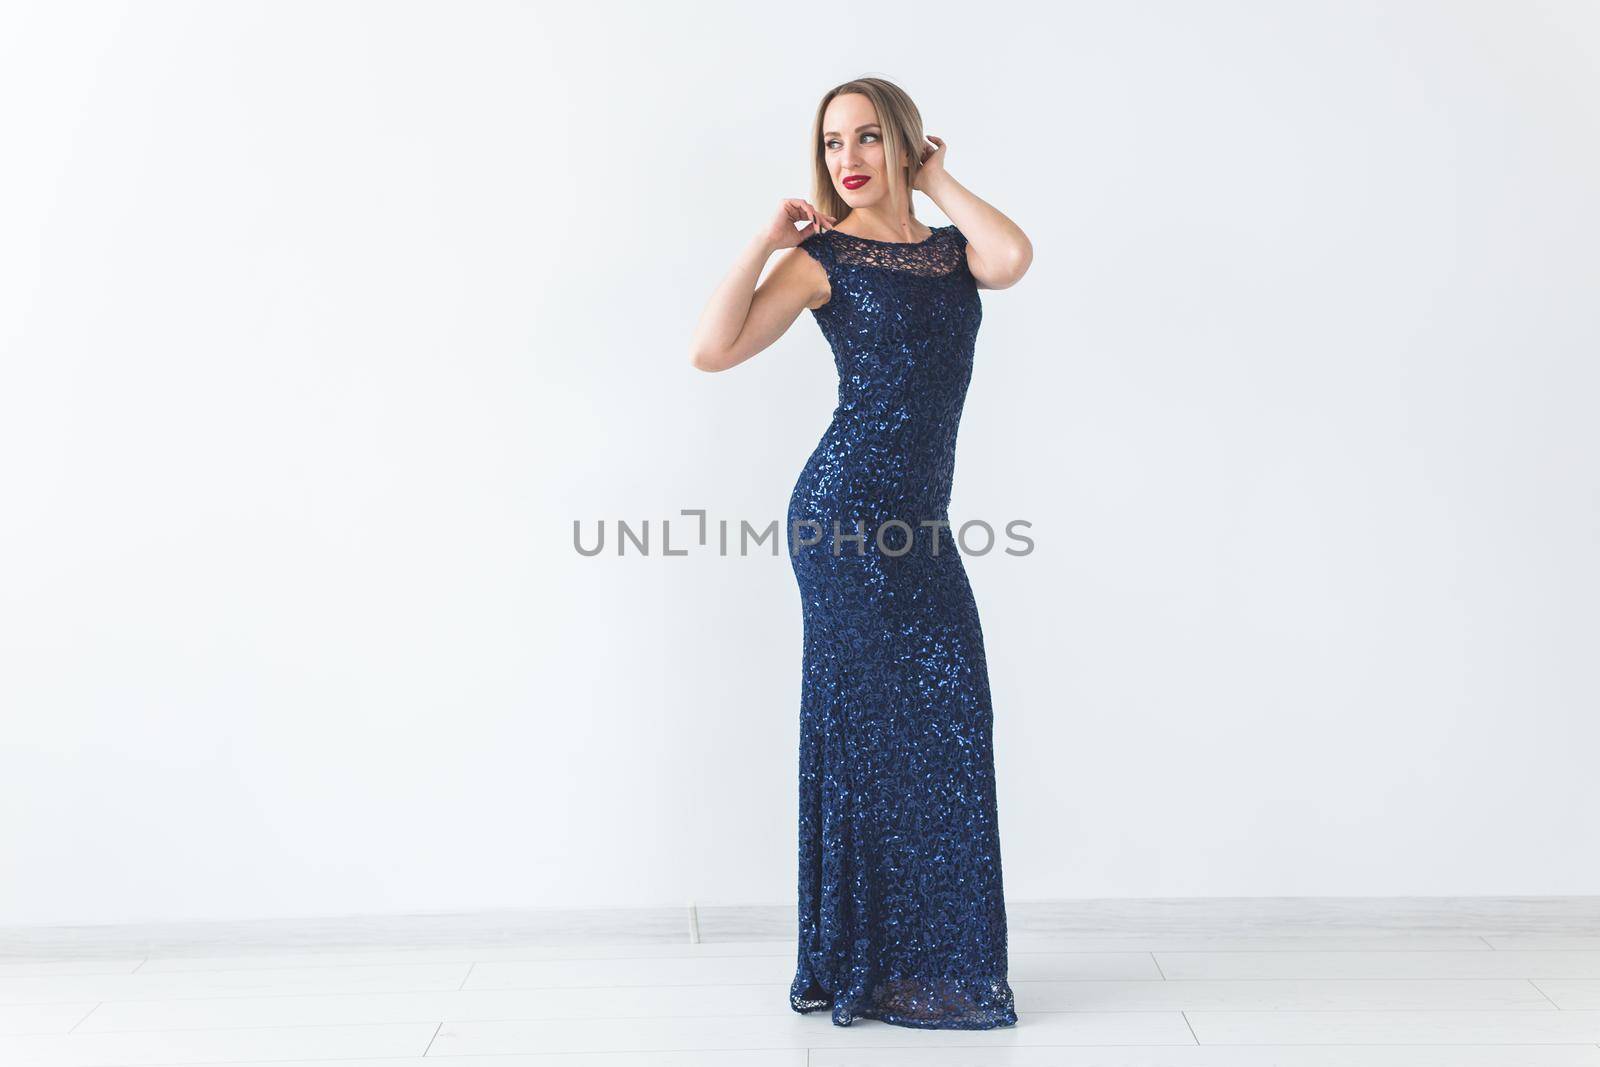 Fashionable young blonde woman in beautiful elegant dress posing at white